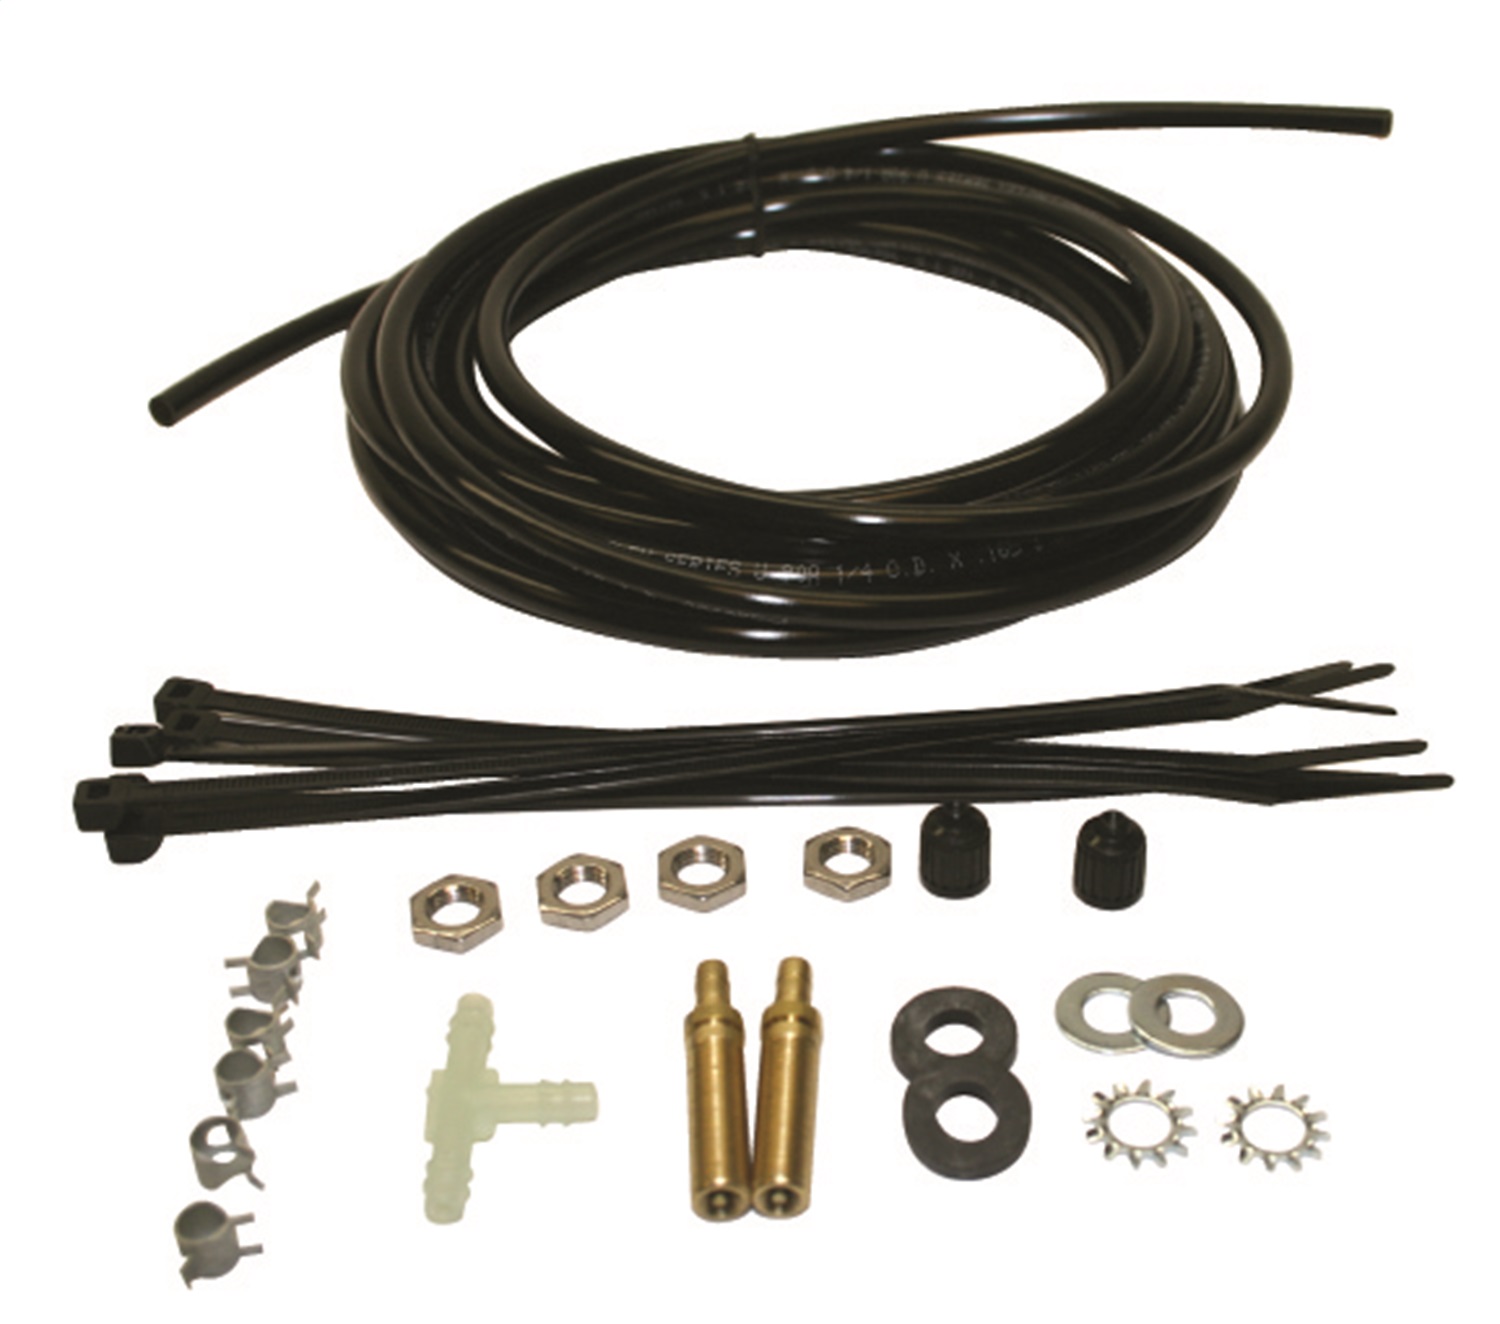 Air Lift Air Lift 22007 Replacement Hose Kit